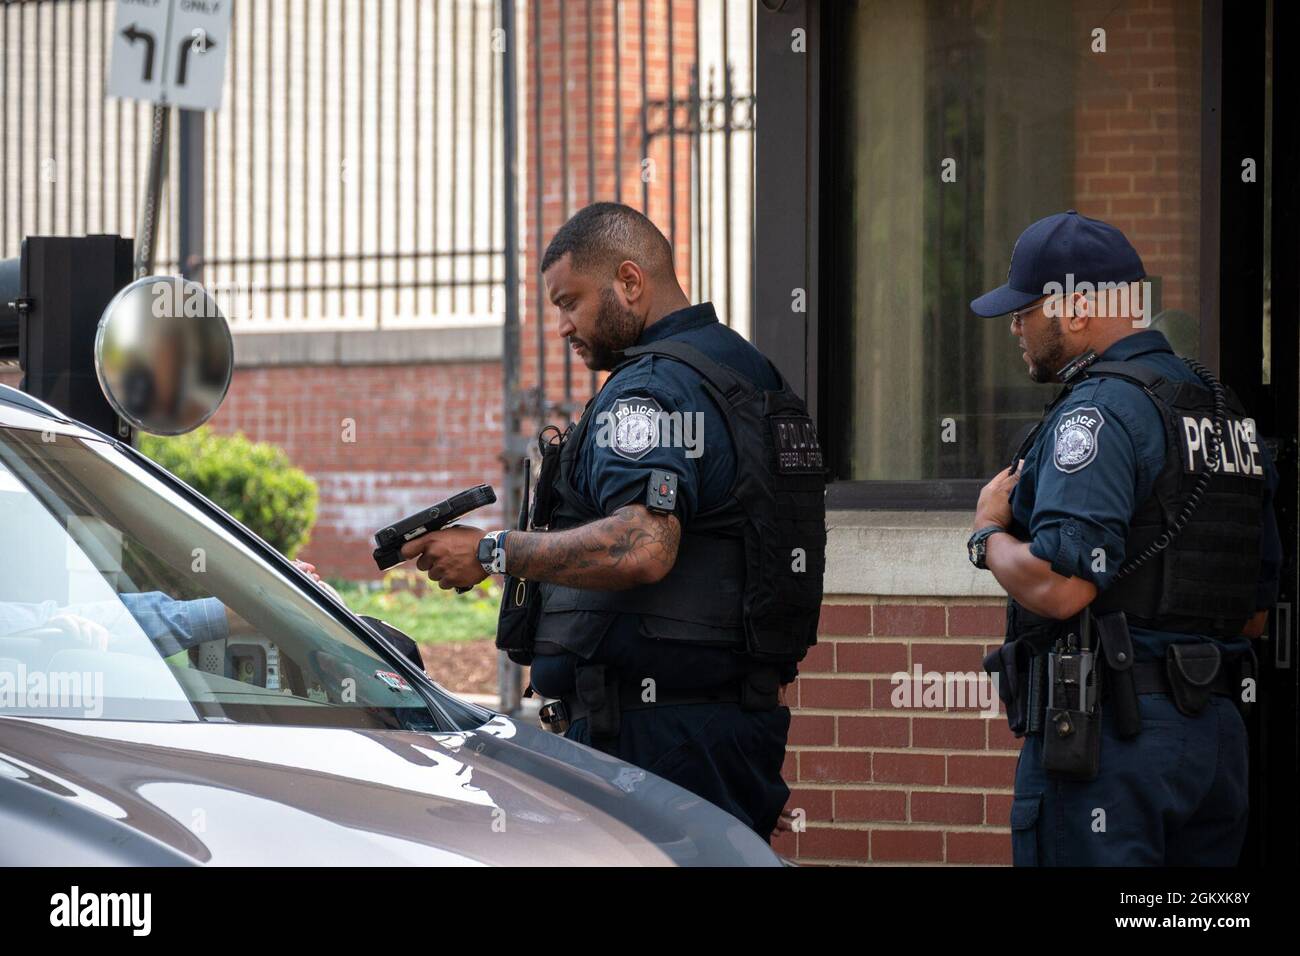 WASHINGTON, DC (July 20, 2021) – A Naval Support Activity Washington federal police officer scans an identification card prior to granting the driver access to Washington Navy Yard. Stock Photo